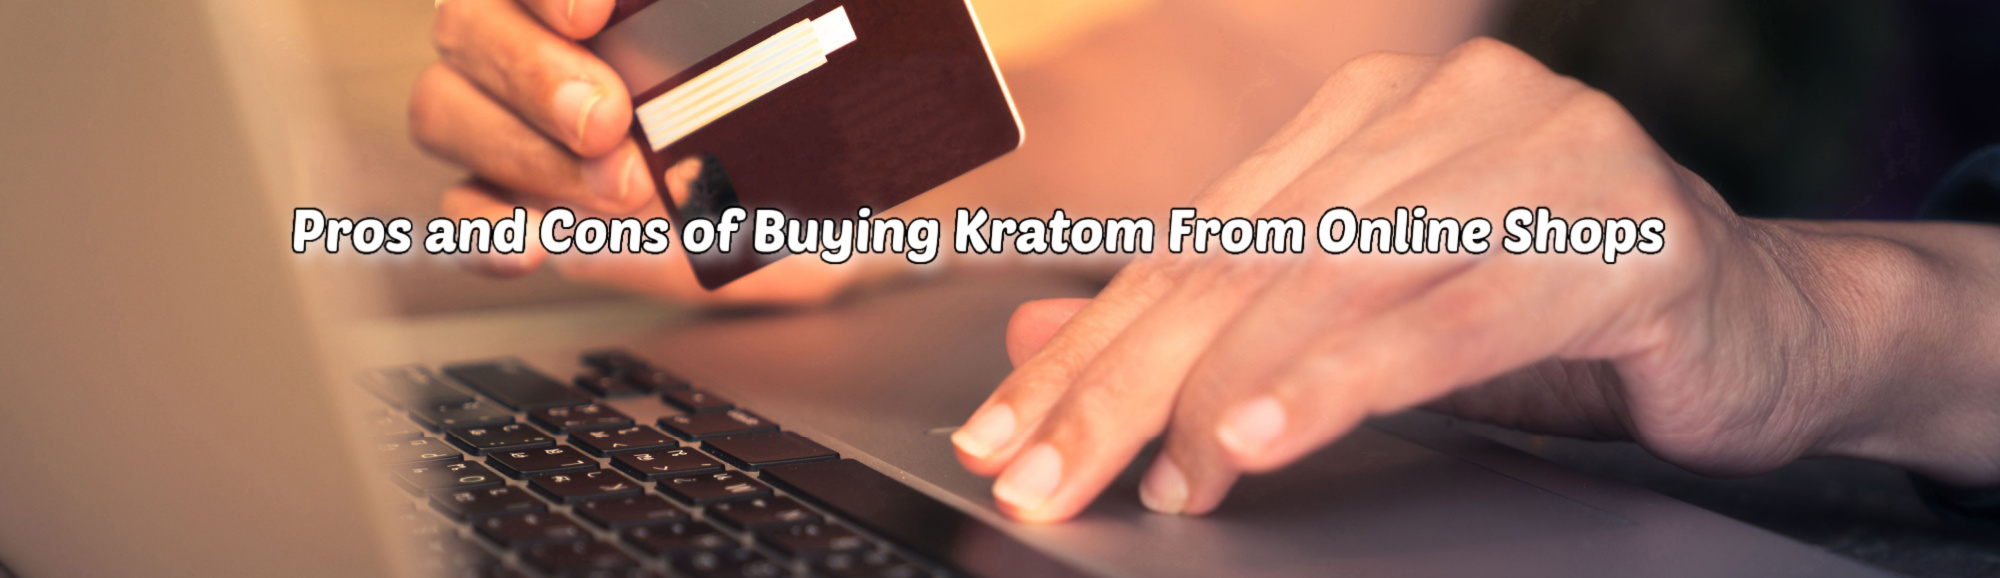 image of pros and cons of buying kratom from online shops